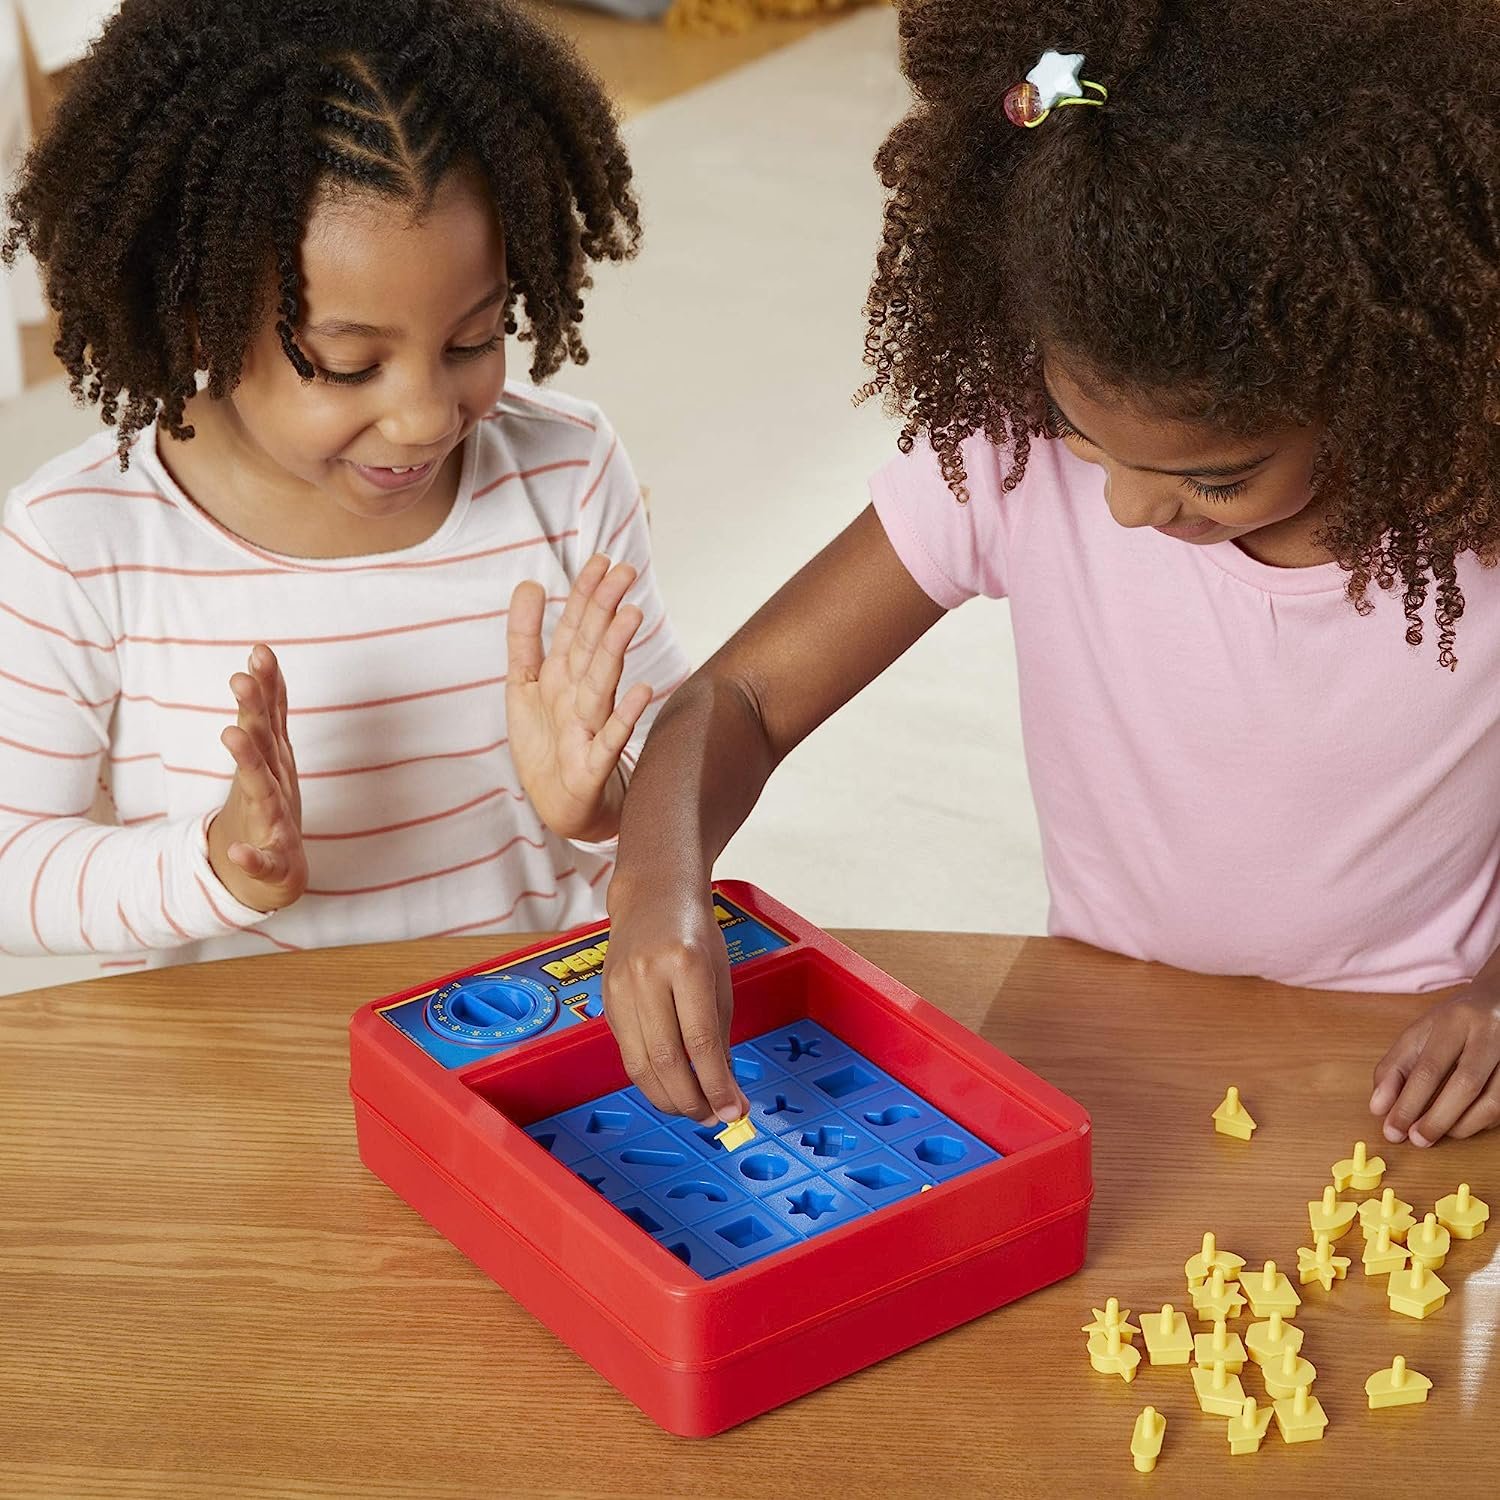 Hasbro Gaming Perfection Game, Multicolor, for ages 84 months to 120 months - image 4 of 14